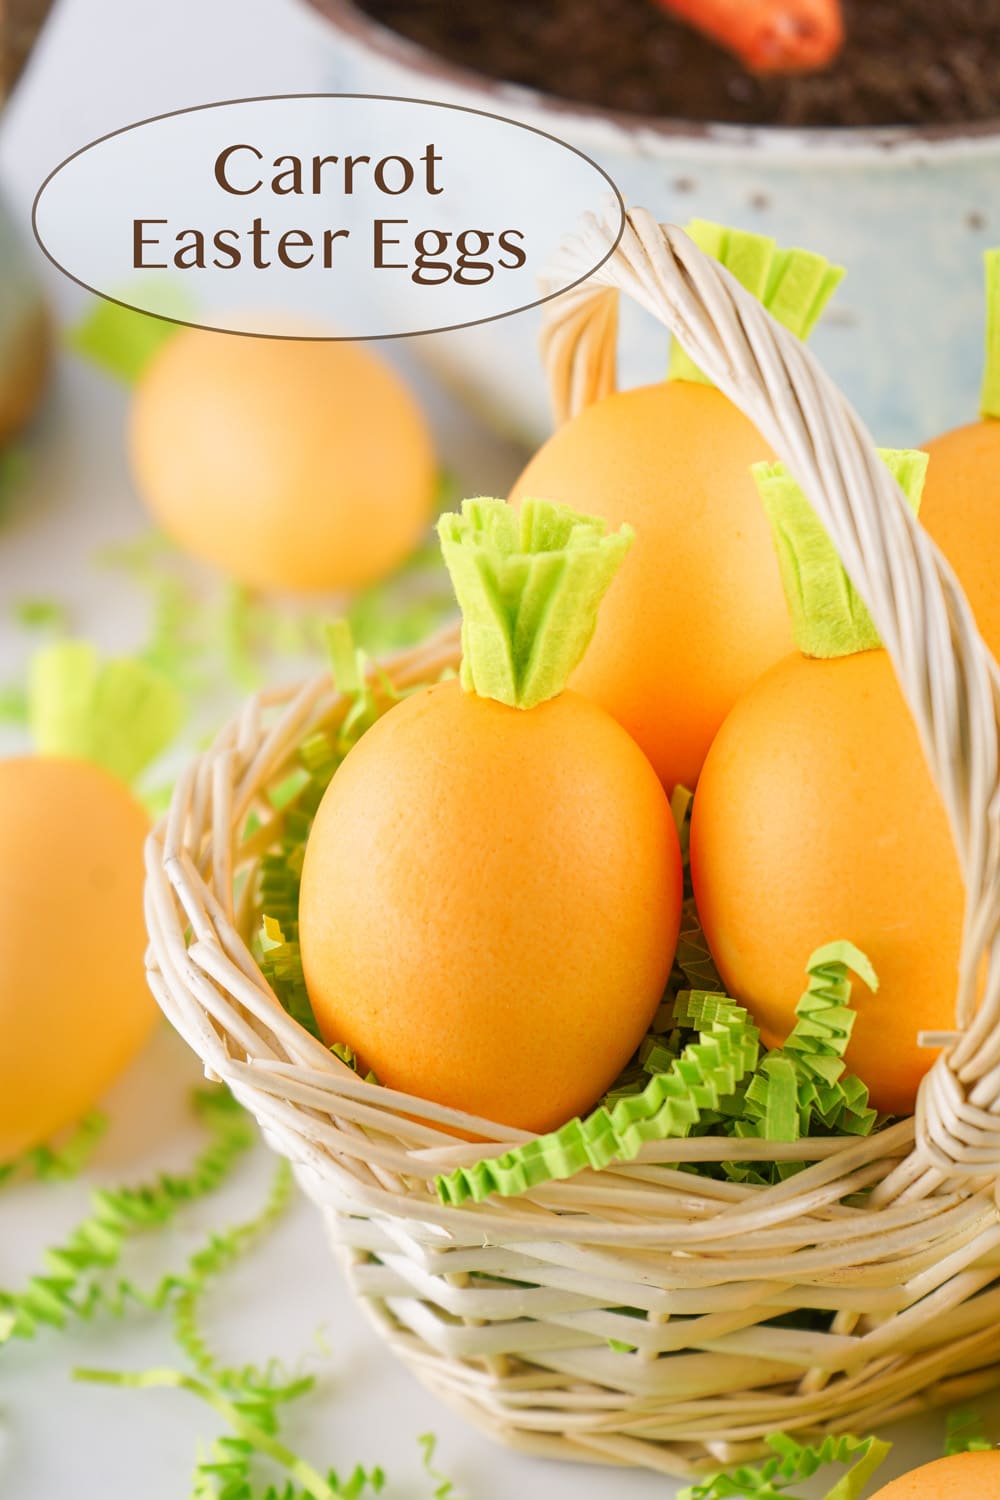 Easter Eggs with little green felt tops to look like carrots in an Easter basket.